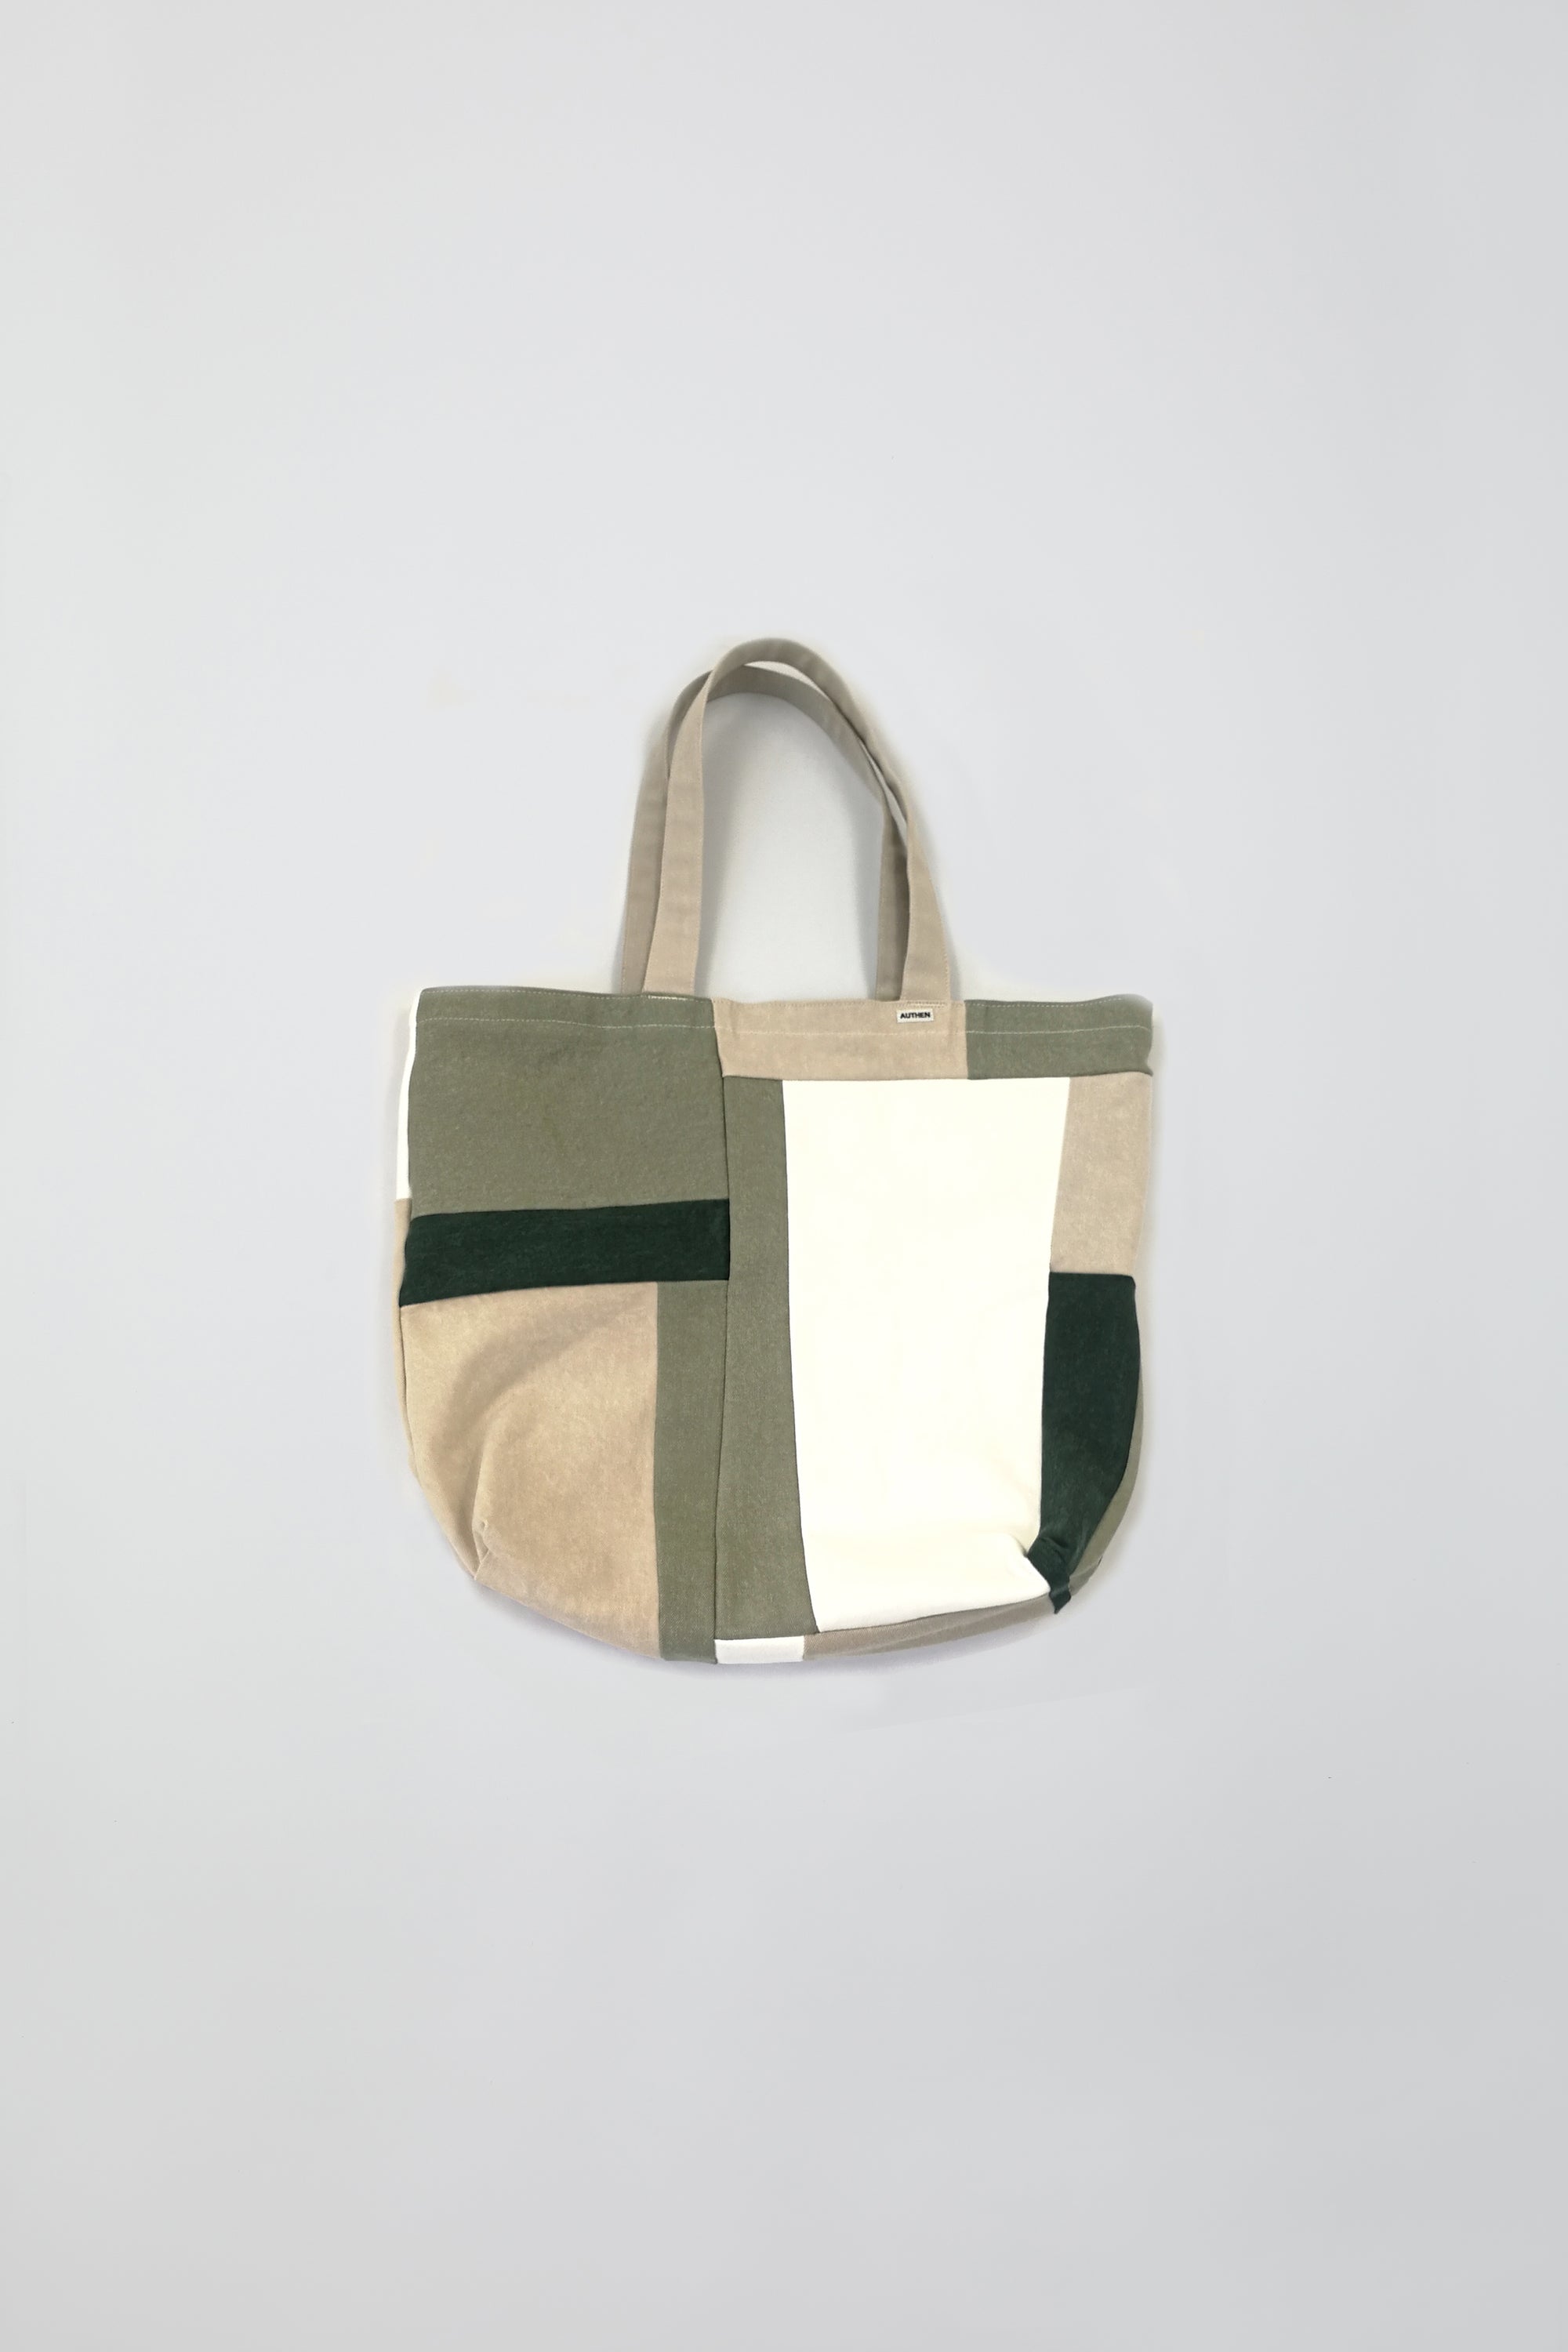 Patch work tote bag